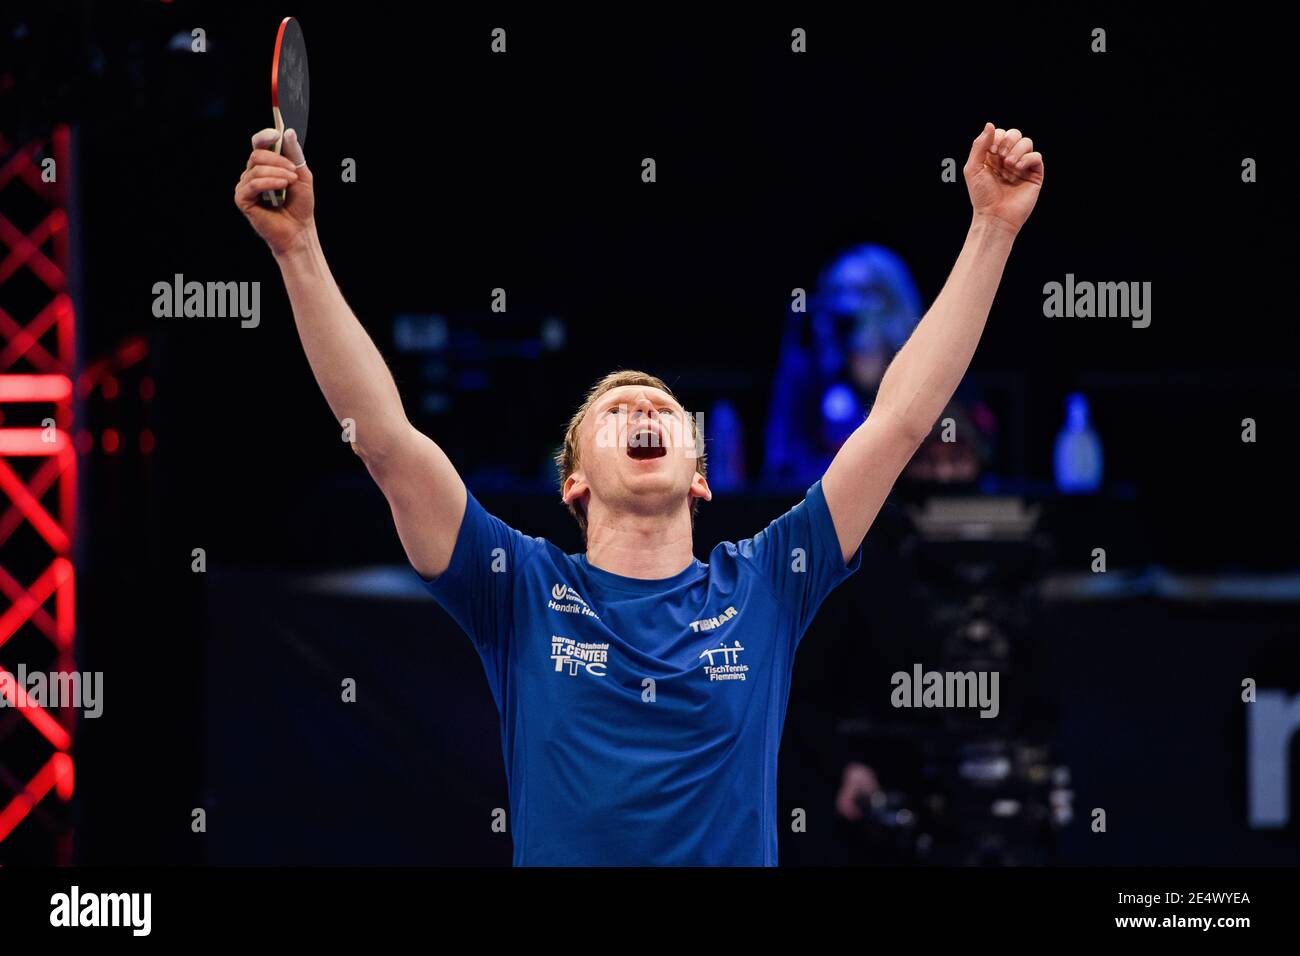 COVENTRY, UNITED KINGDOM. 24th Jan, 2021. Alexander Flemming (GER) celebrates after winning the Final during 2021 World Ping Pong Masters at Ricoh Arena on Sunday, January 24, 2021 in COVENTRY, ENGLAND. Credit: Taka G Wu/Alamy Live News Stock Photo